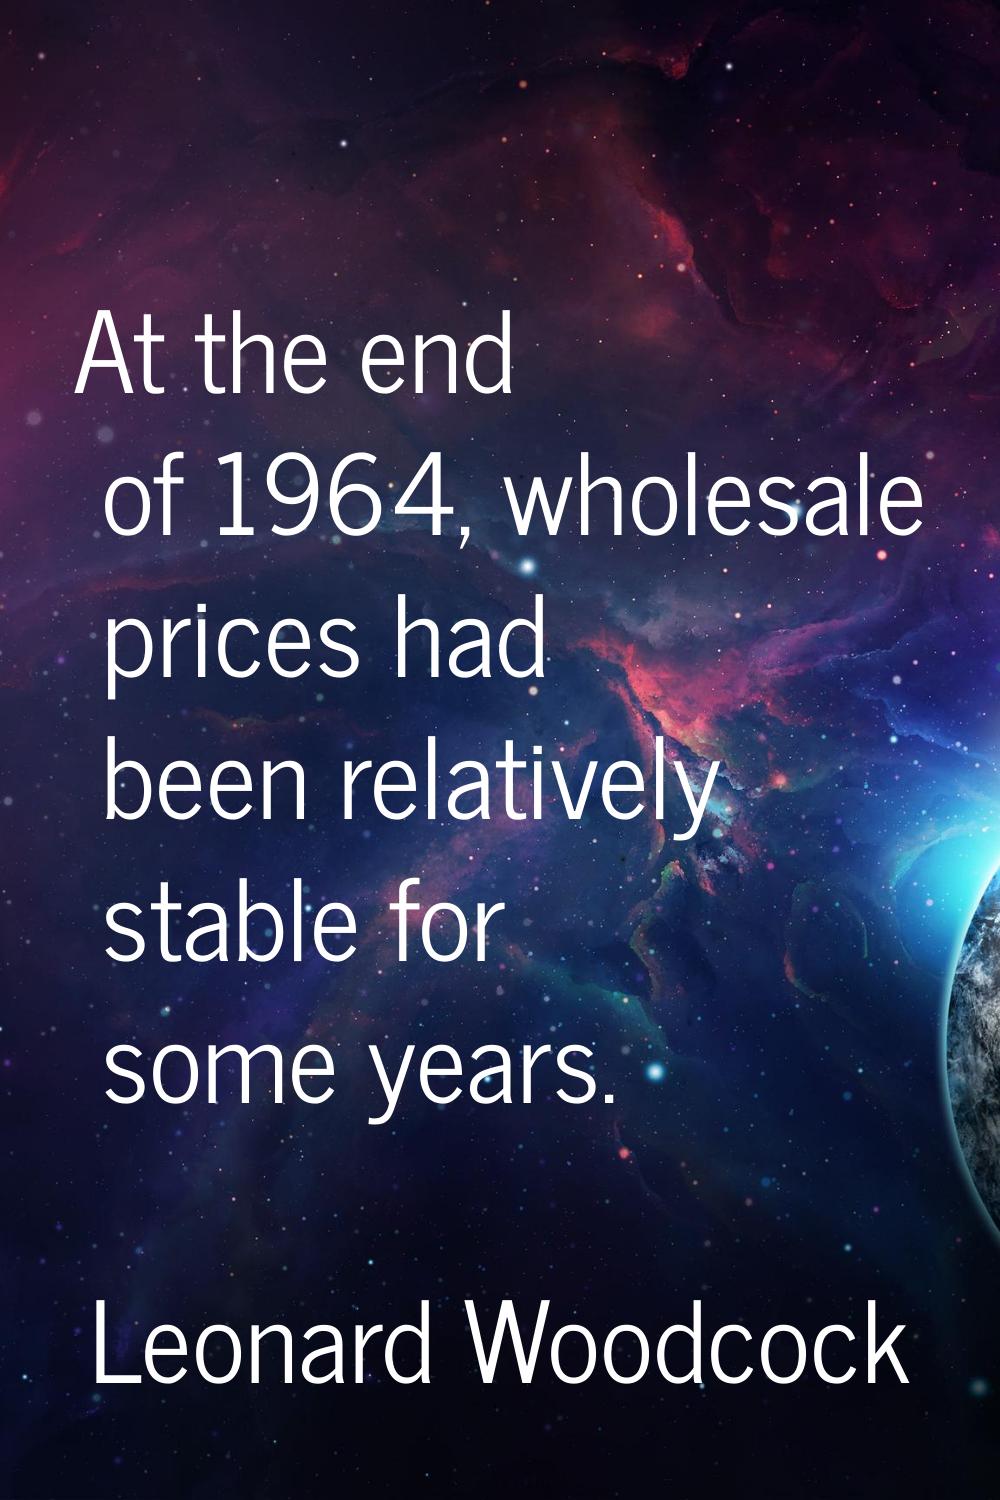 At the end of 1964, wholesale prices had been relatively stable for some years.